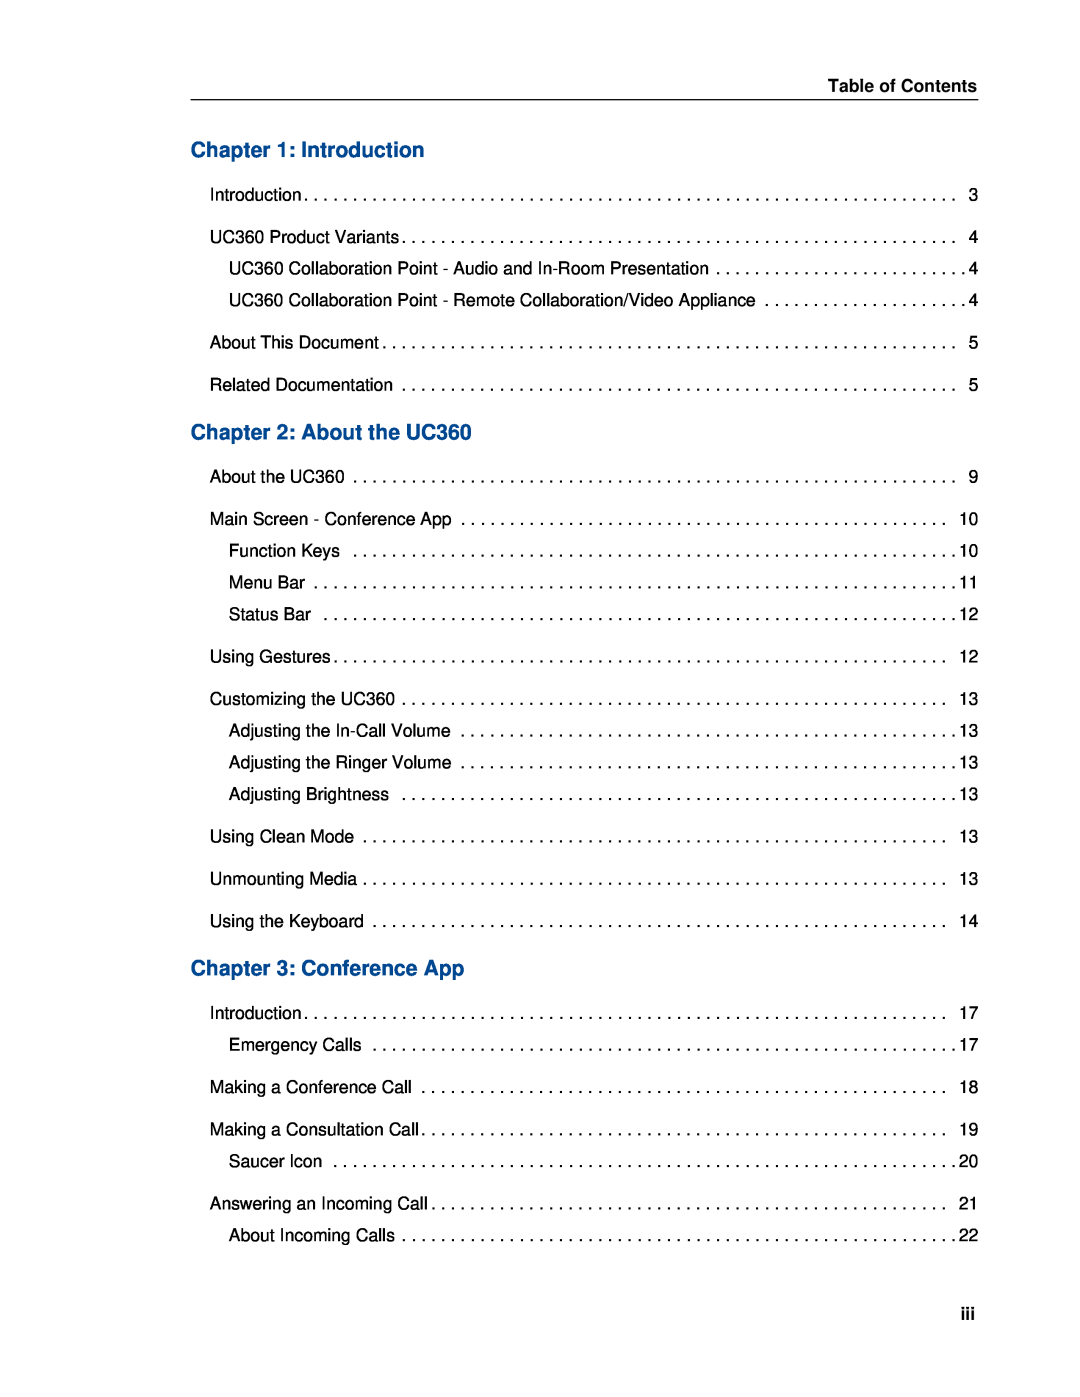 Mitel manual Introduction, About the UC360, Conference App, Table of Contents 